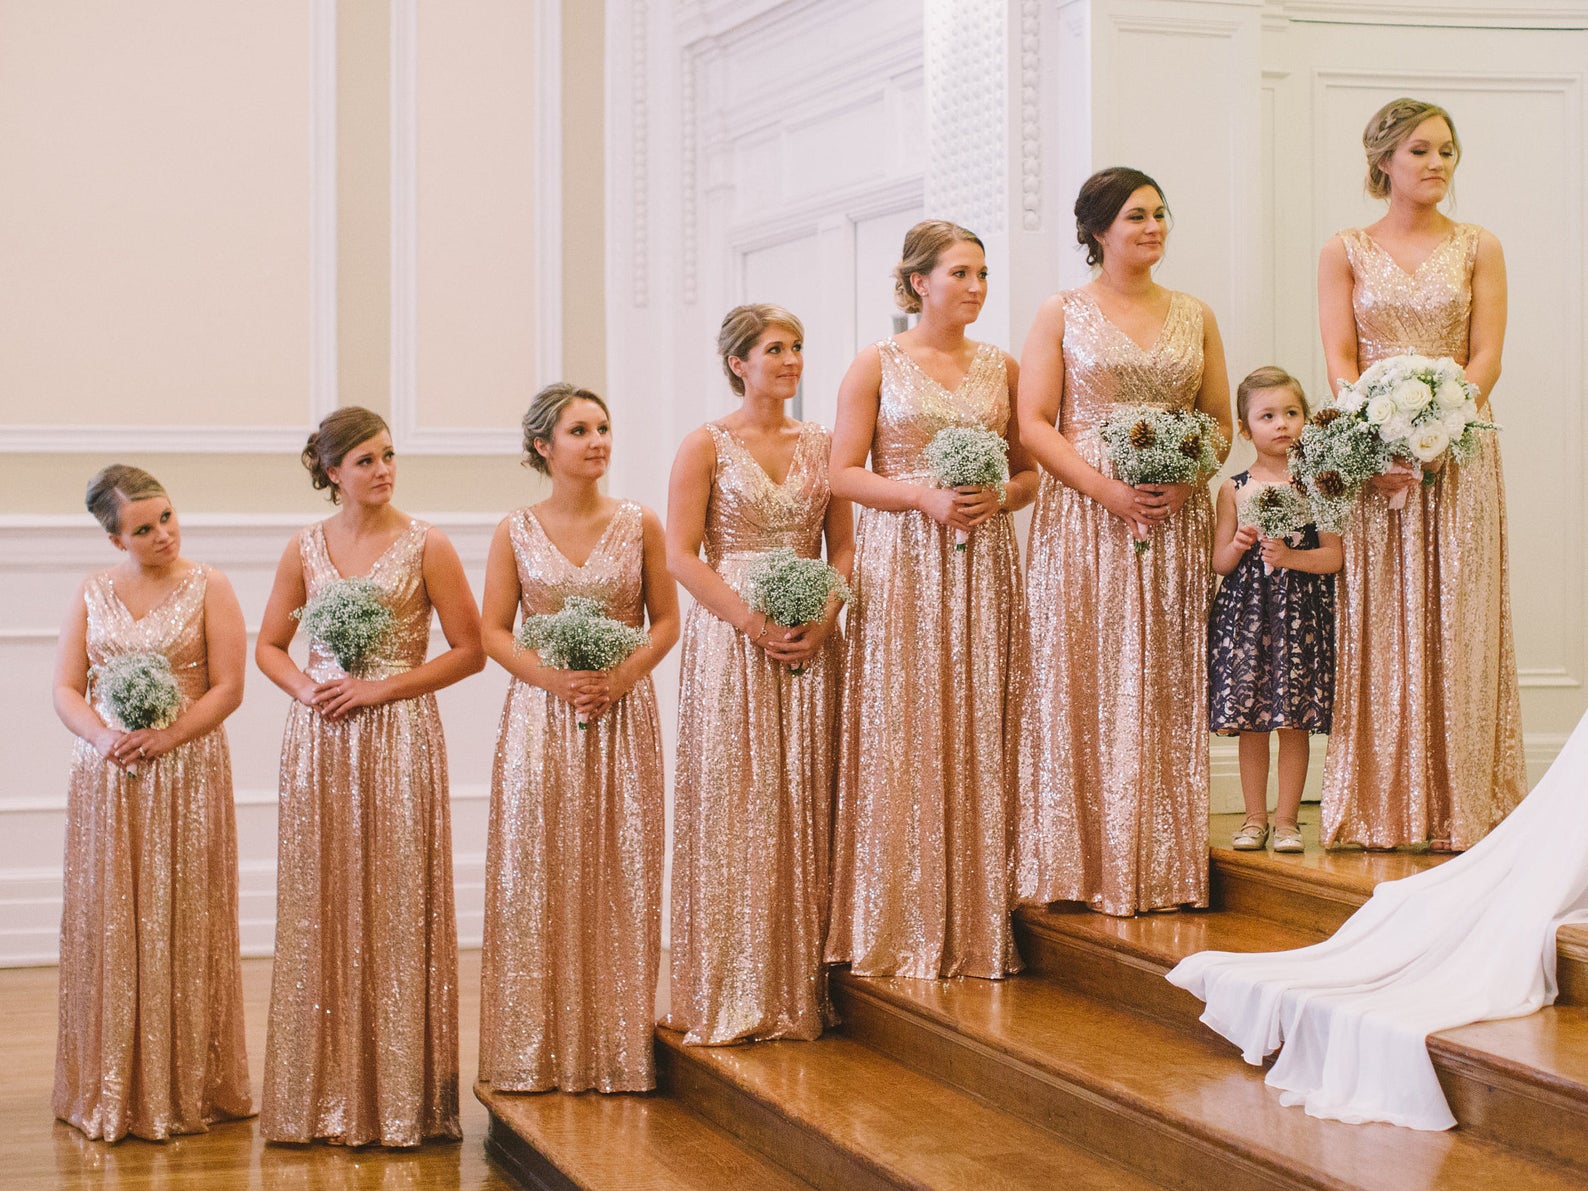 12 shops for gorgeous bridesmaid dresses in Singapore | Honeycombers